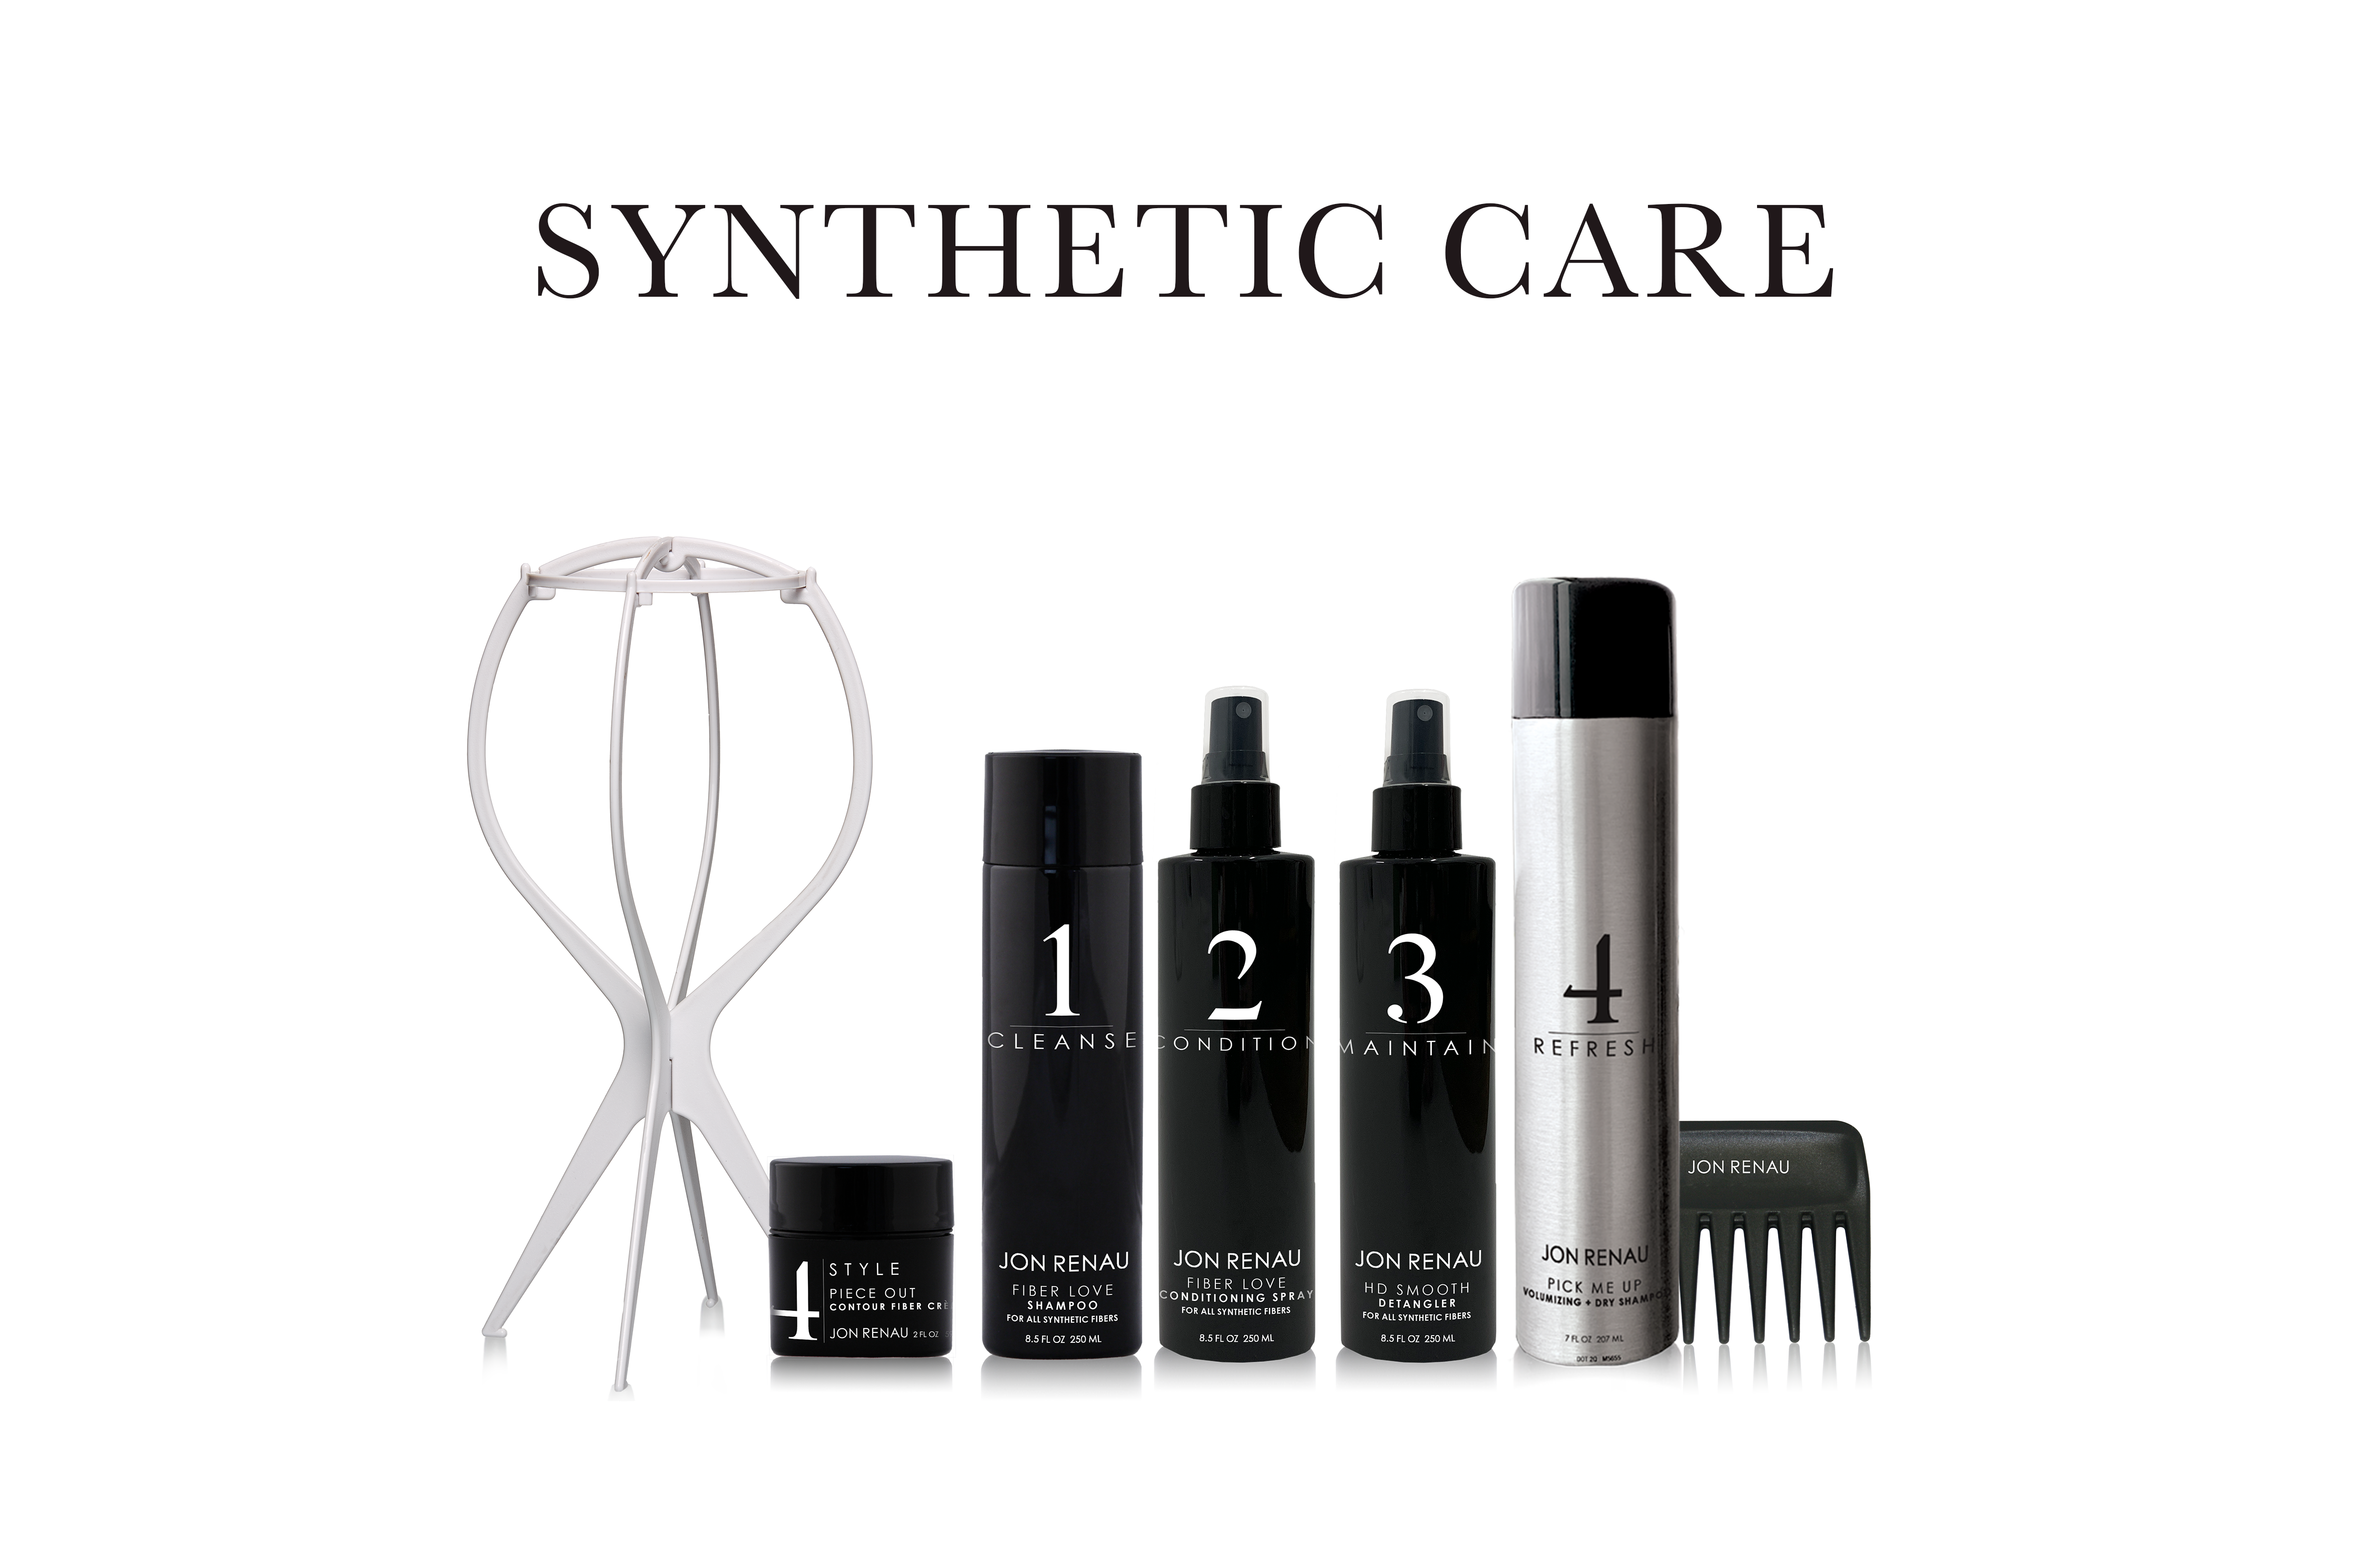 Synthetic Care